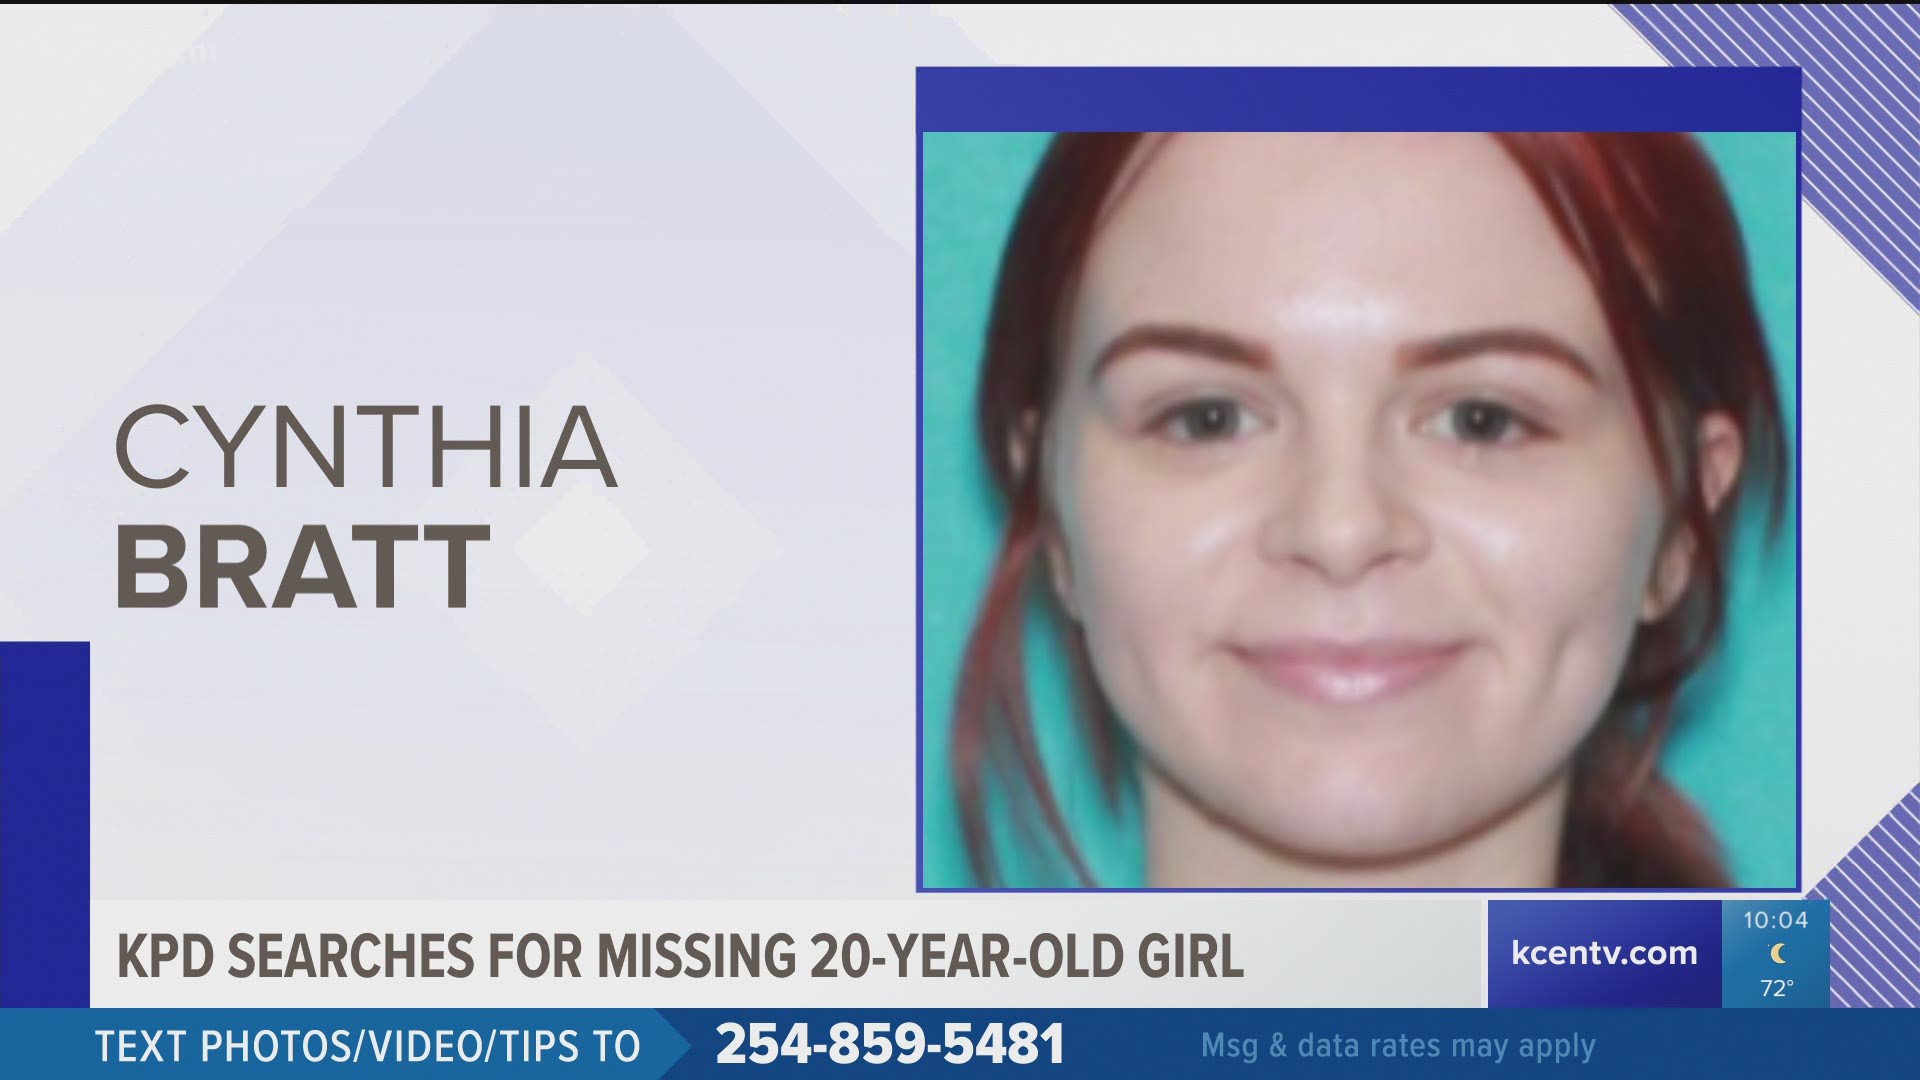 Police say Cynthia Louise Bratt has not been heard from by family since April 26.